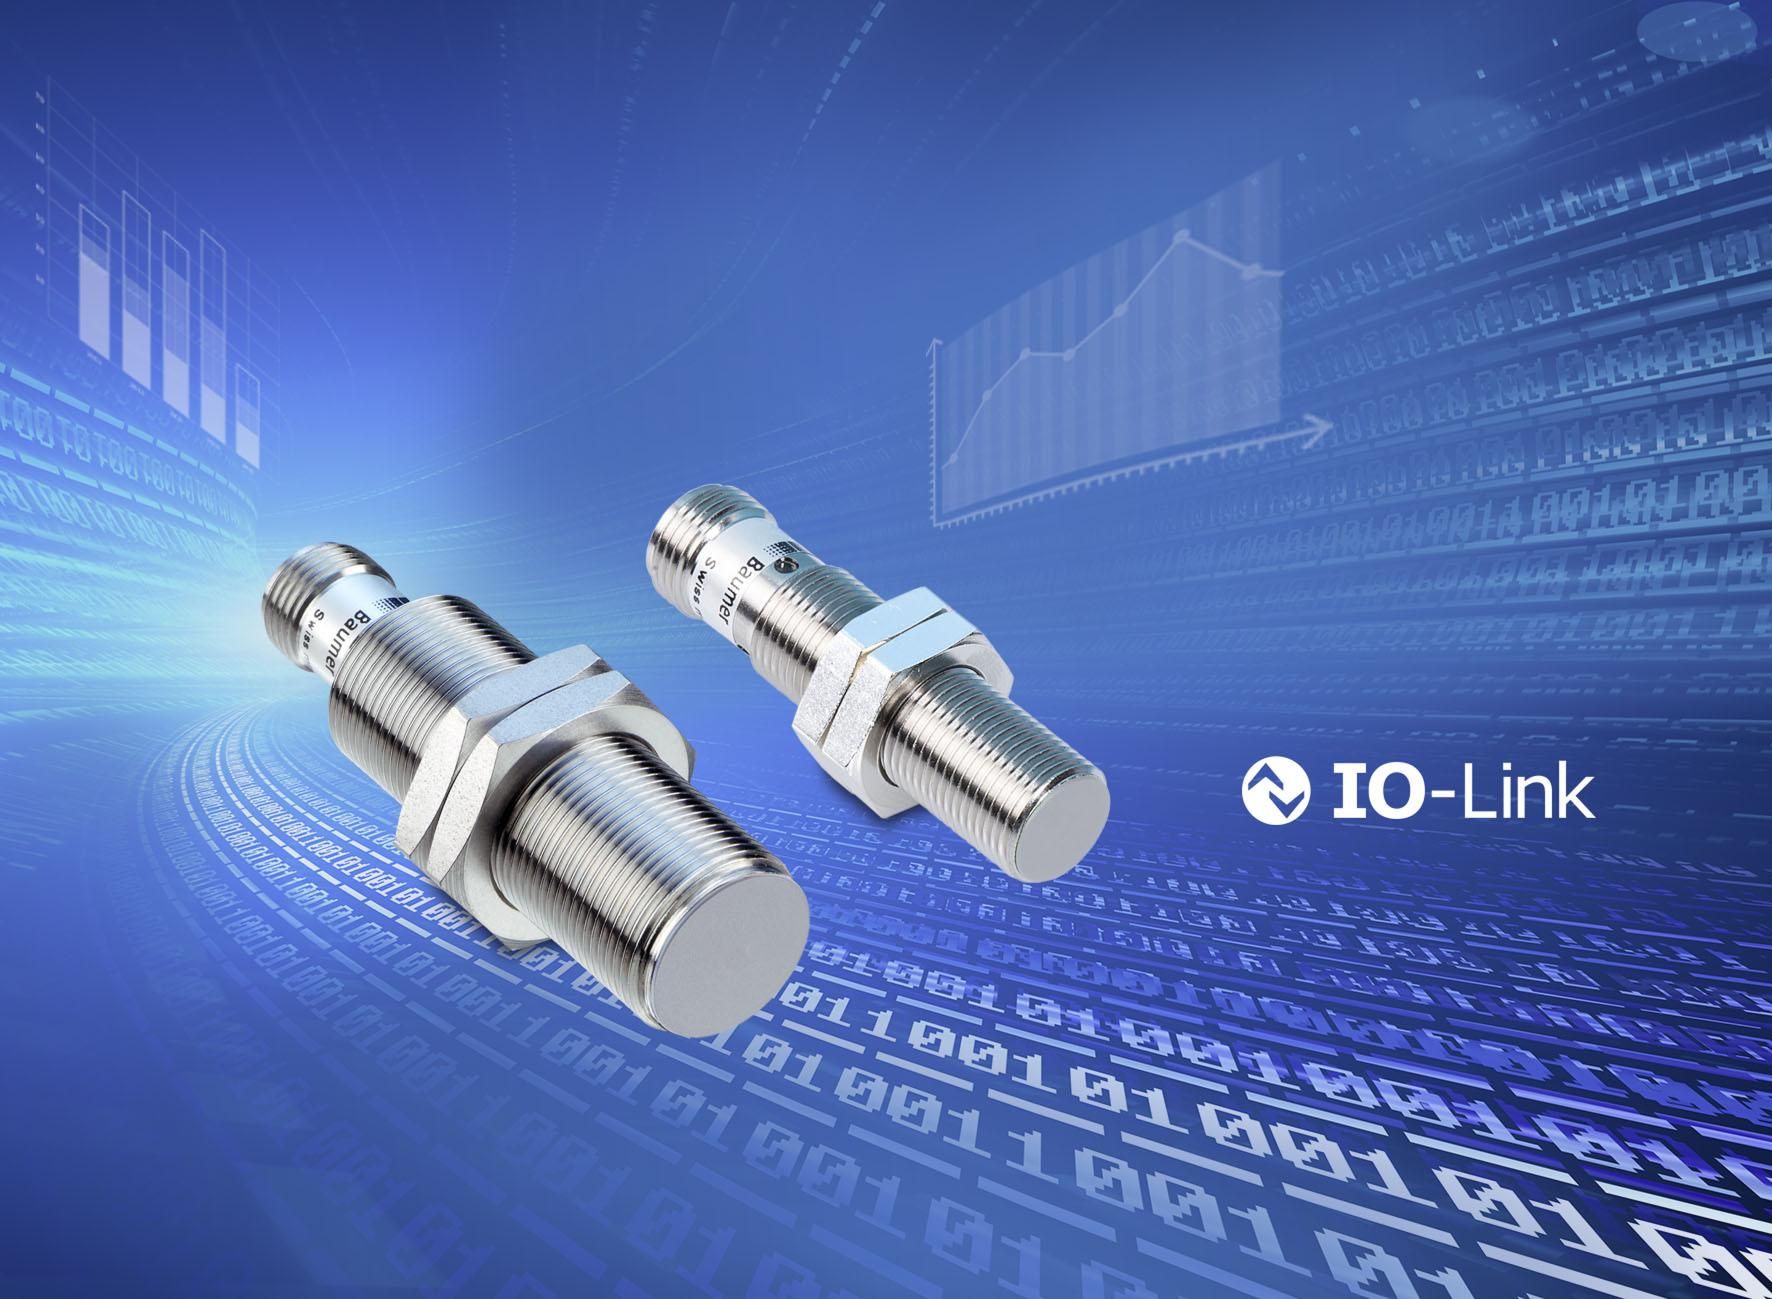 Leaving nothing to chance – inductive IO-link sensors provide comprehensive diagnostic data for the greatest process safety